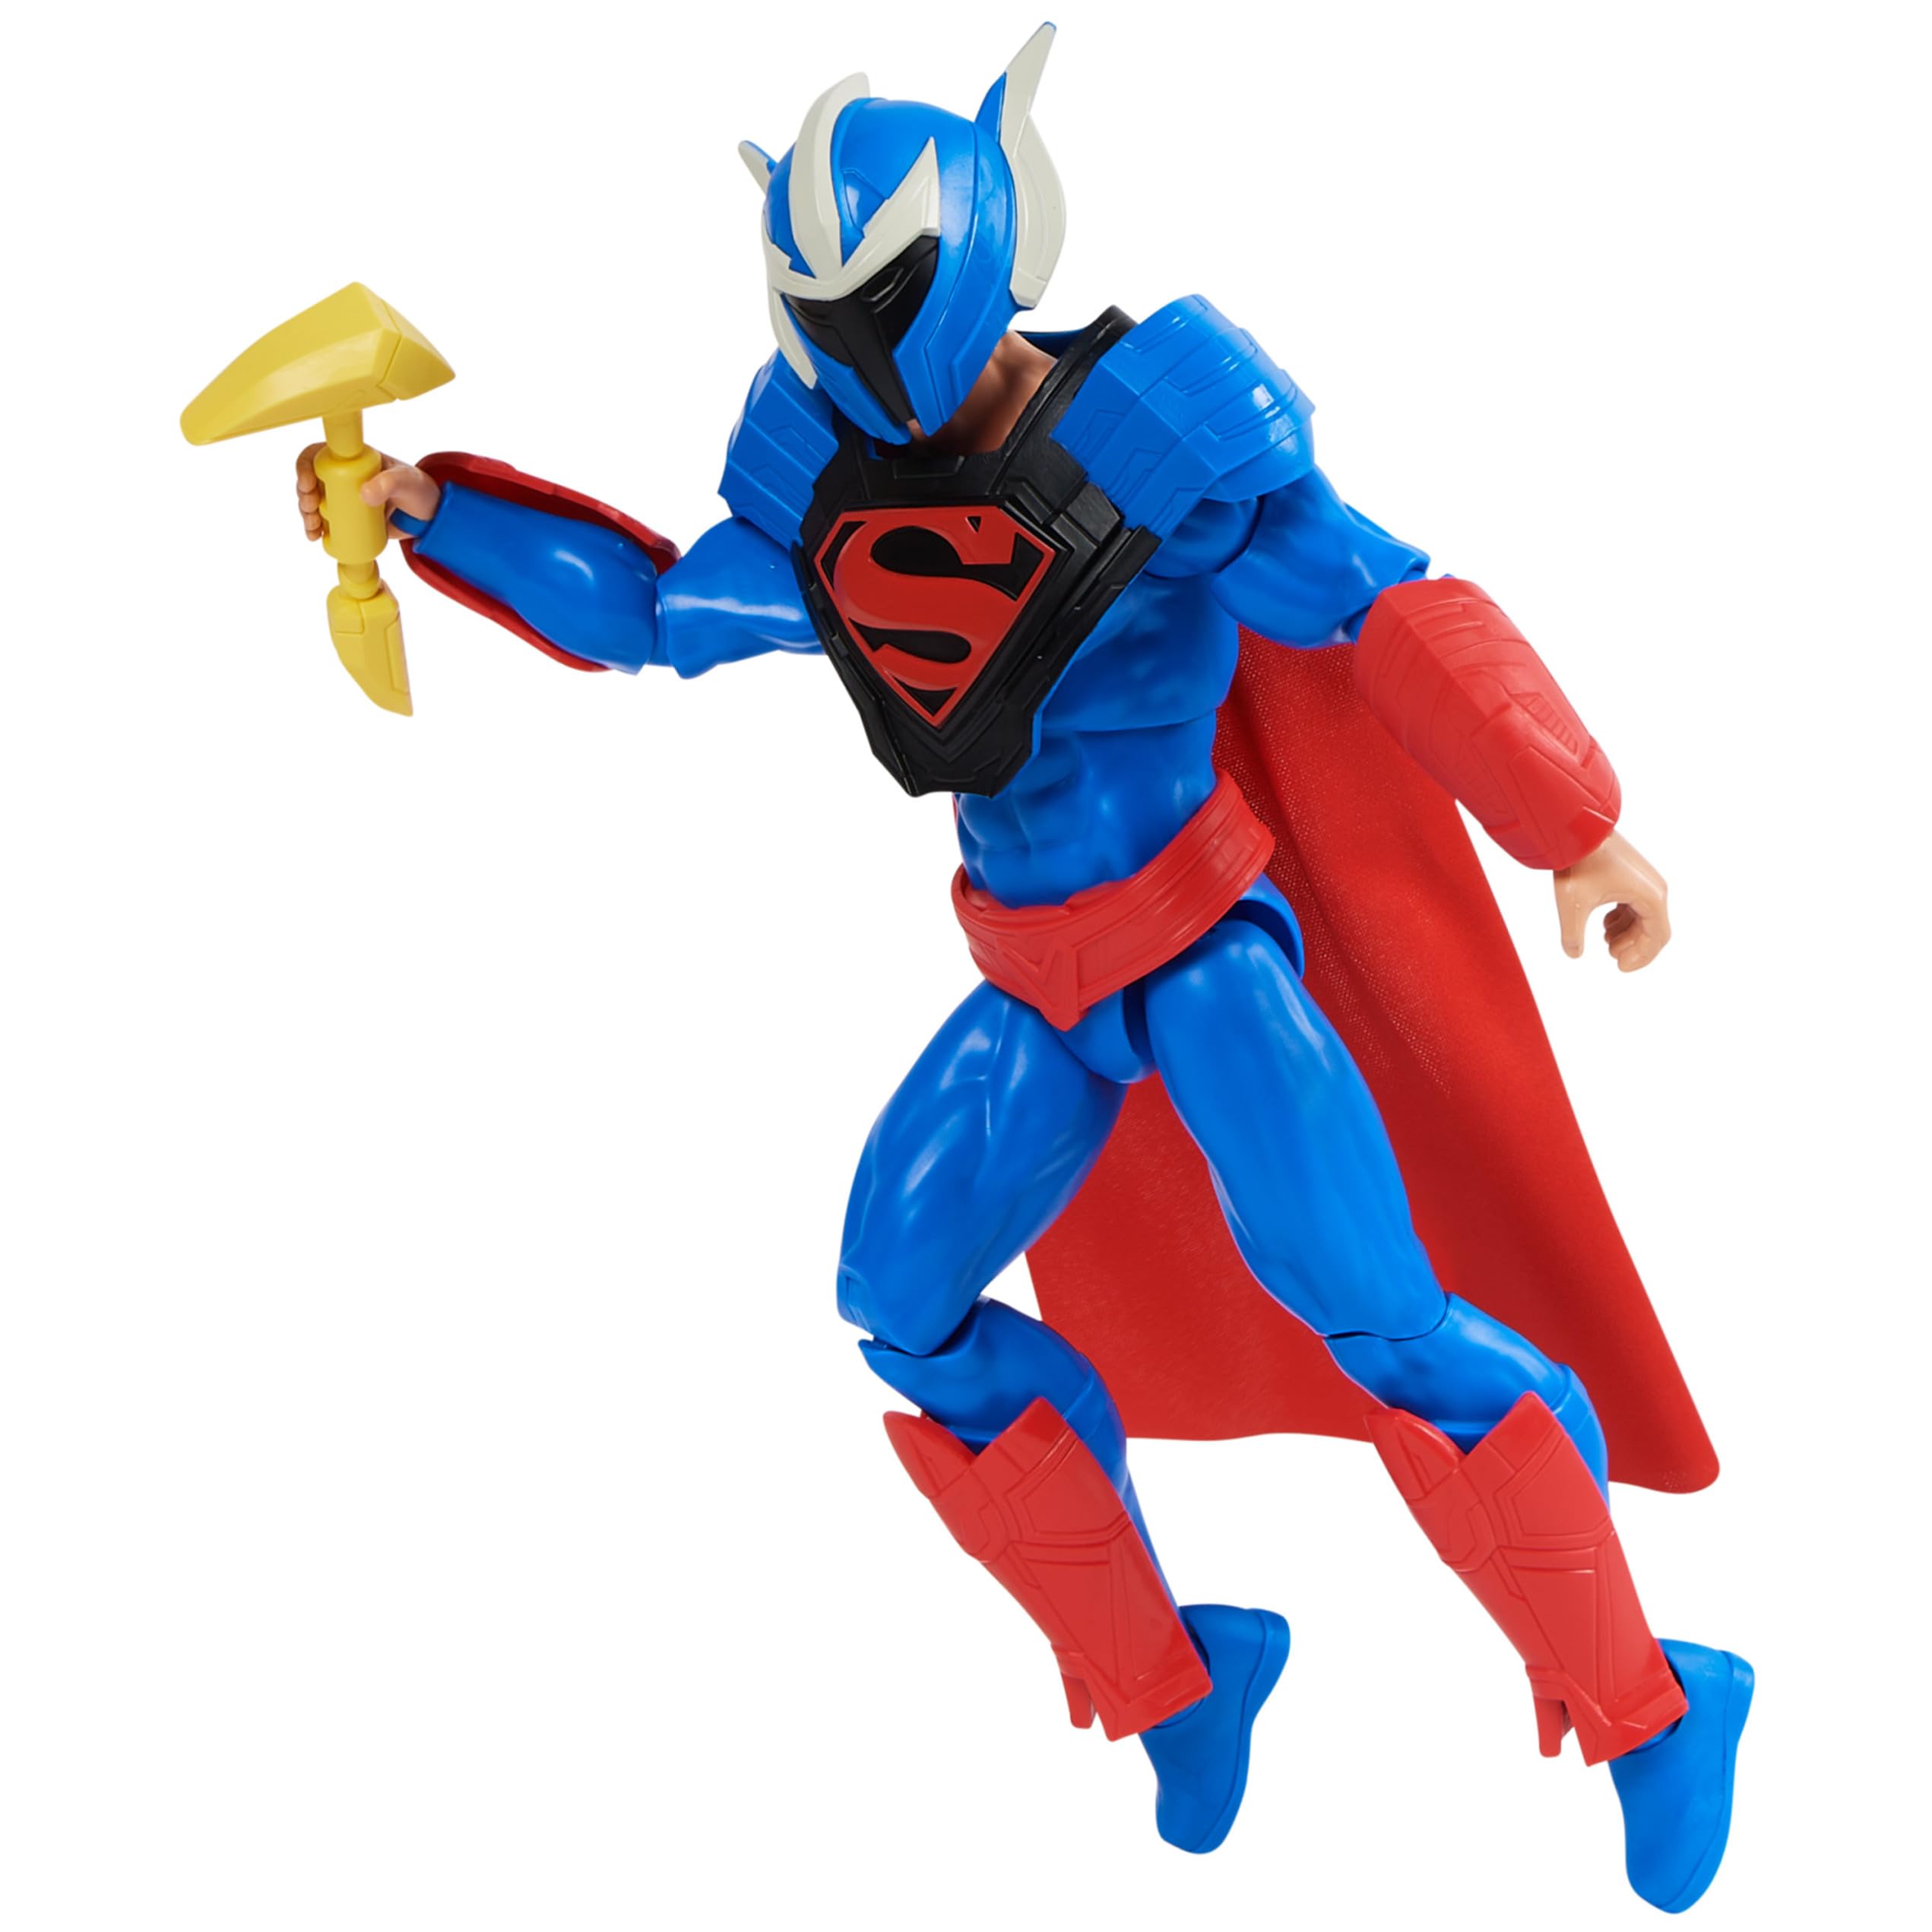 DC Comics, Superman Man of Steel Action Figure, DC Adventures, 12-inch, 9 Accessories, Collectible Superhero Kids Toys for Boys and Girls, Ages 4+